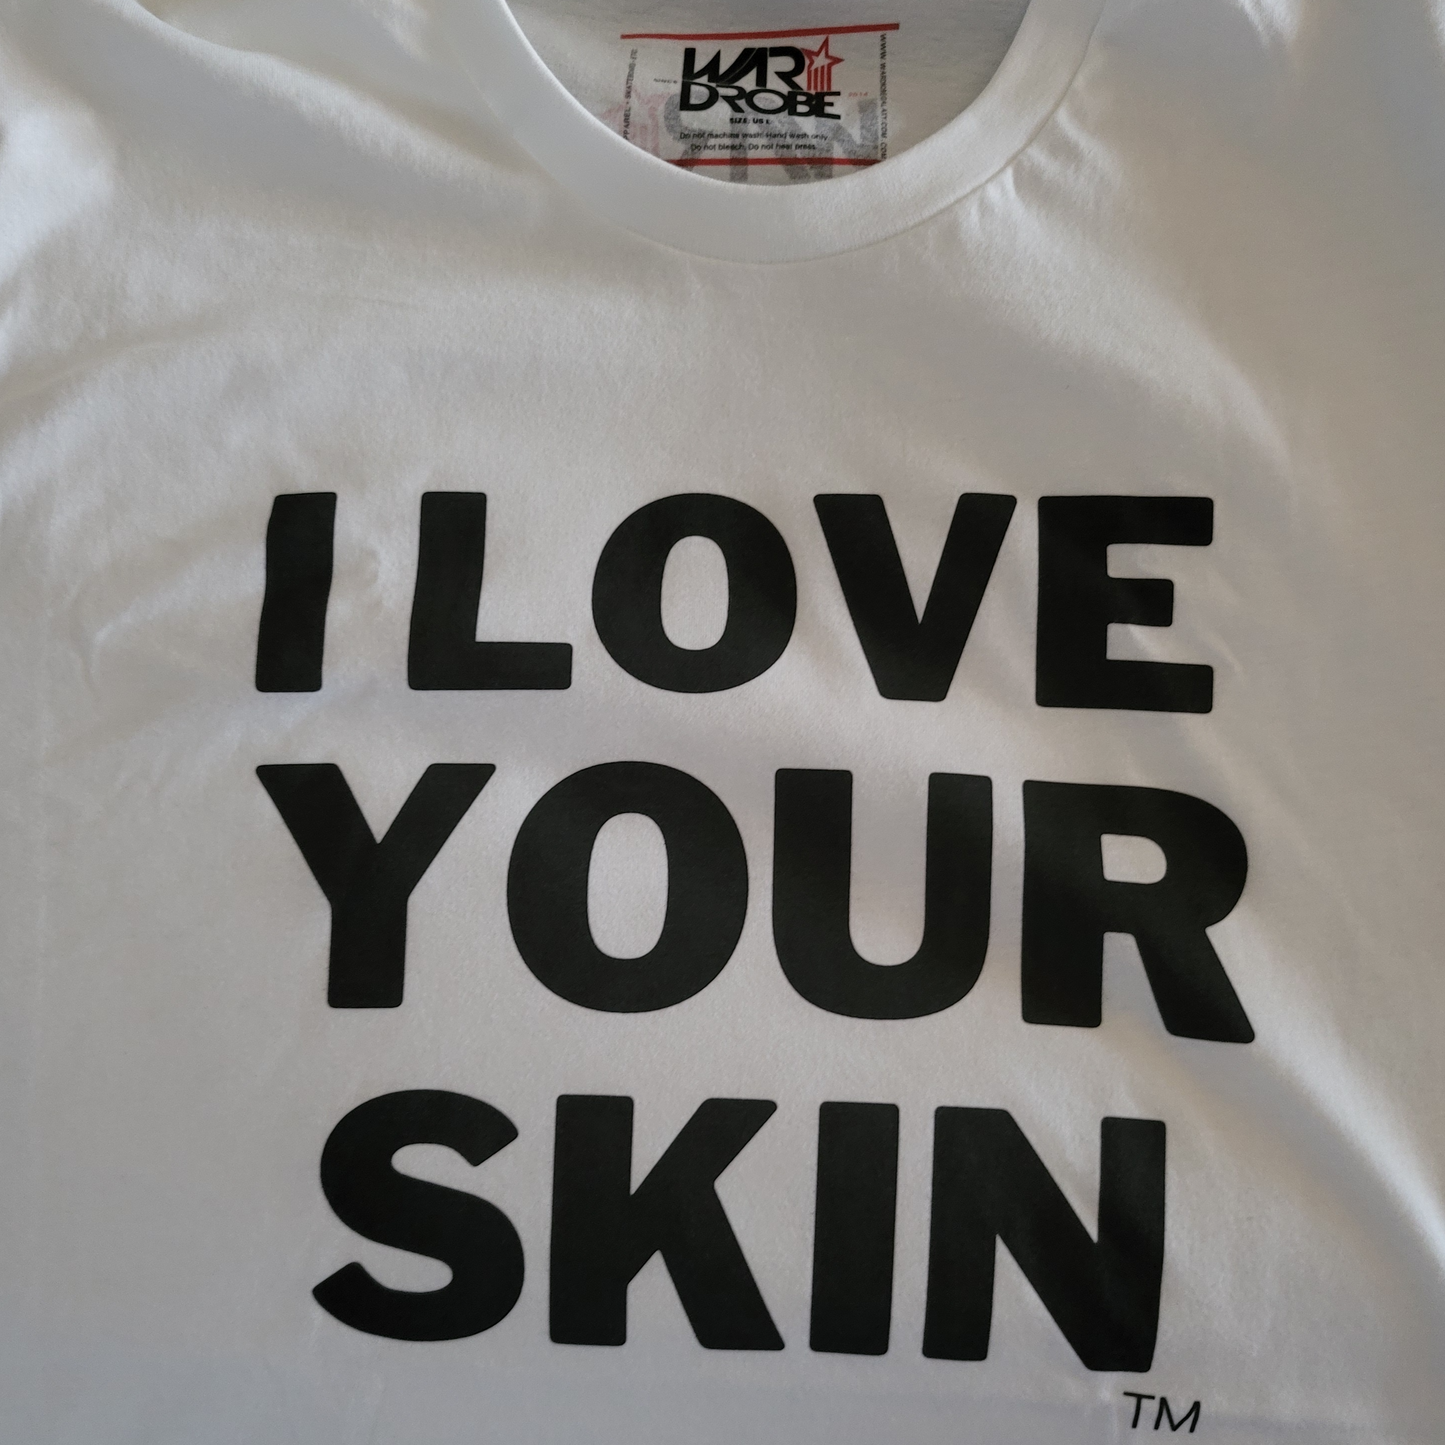 Show Your Skin - Limited Edition Tee